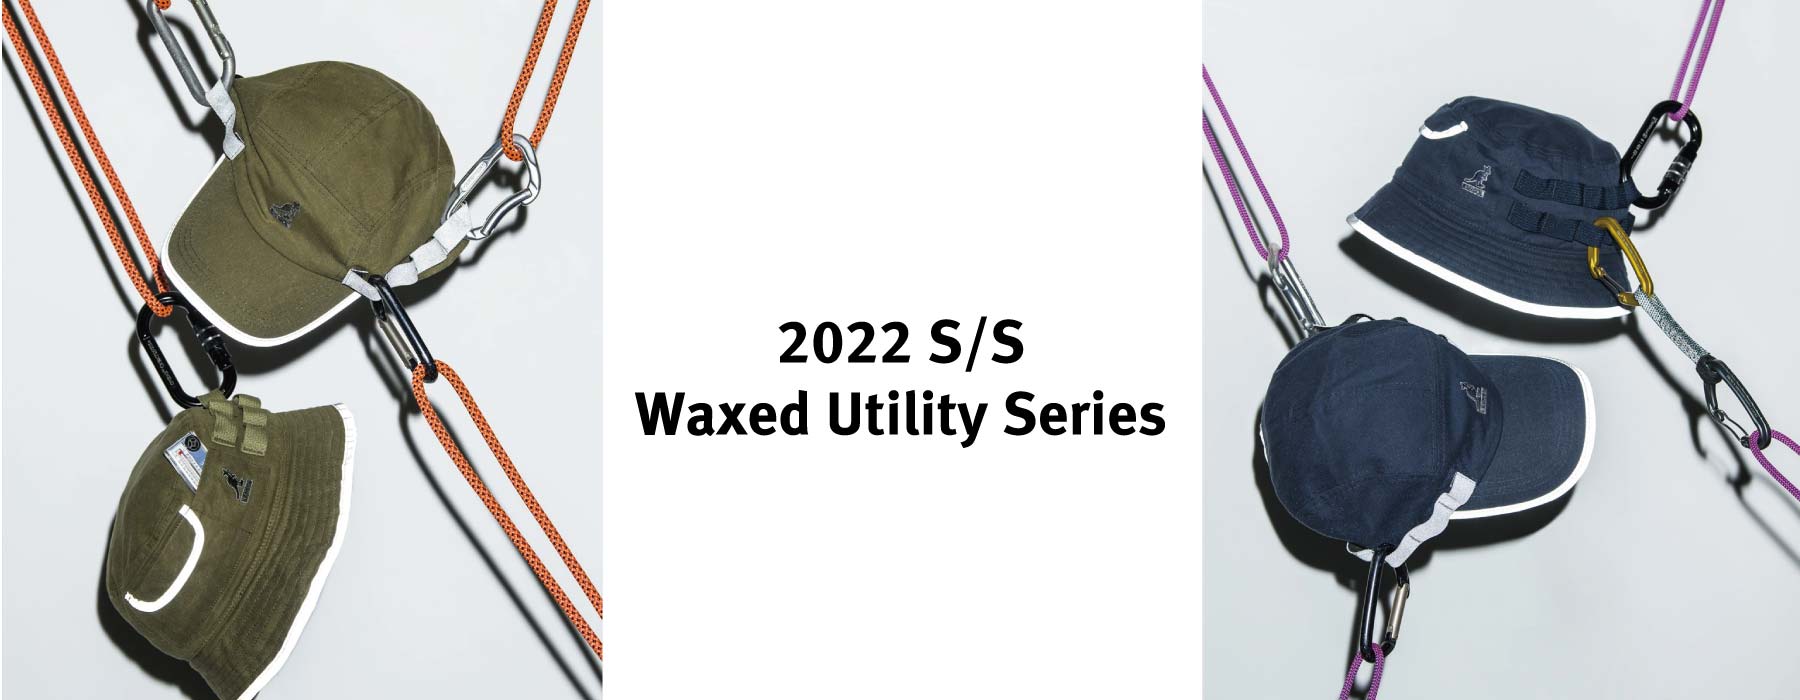 【2022 S/S Waxed Utility Series】